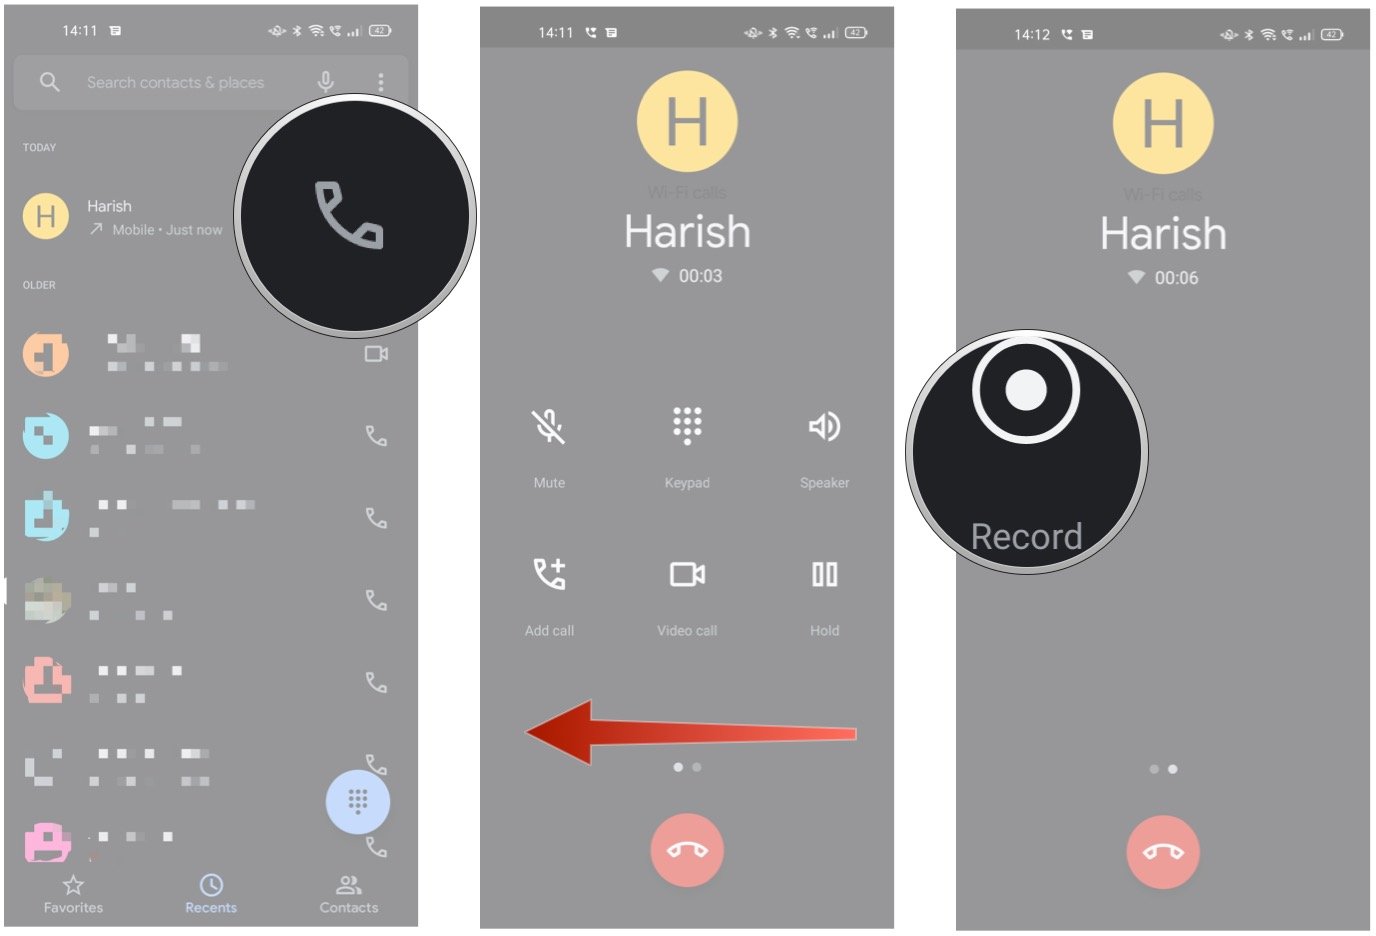 How to record phone calls on OPPO phones